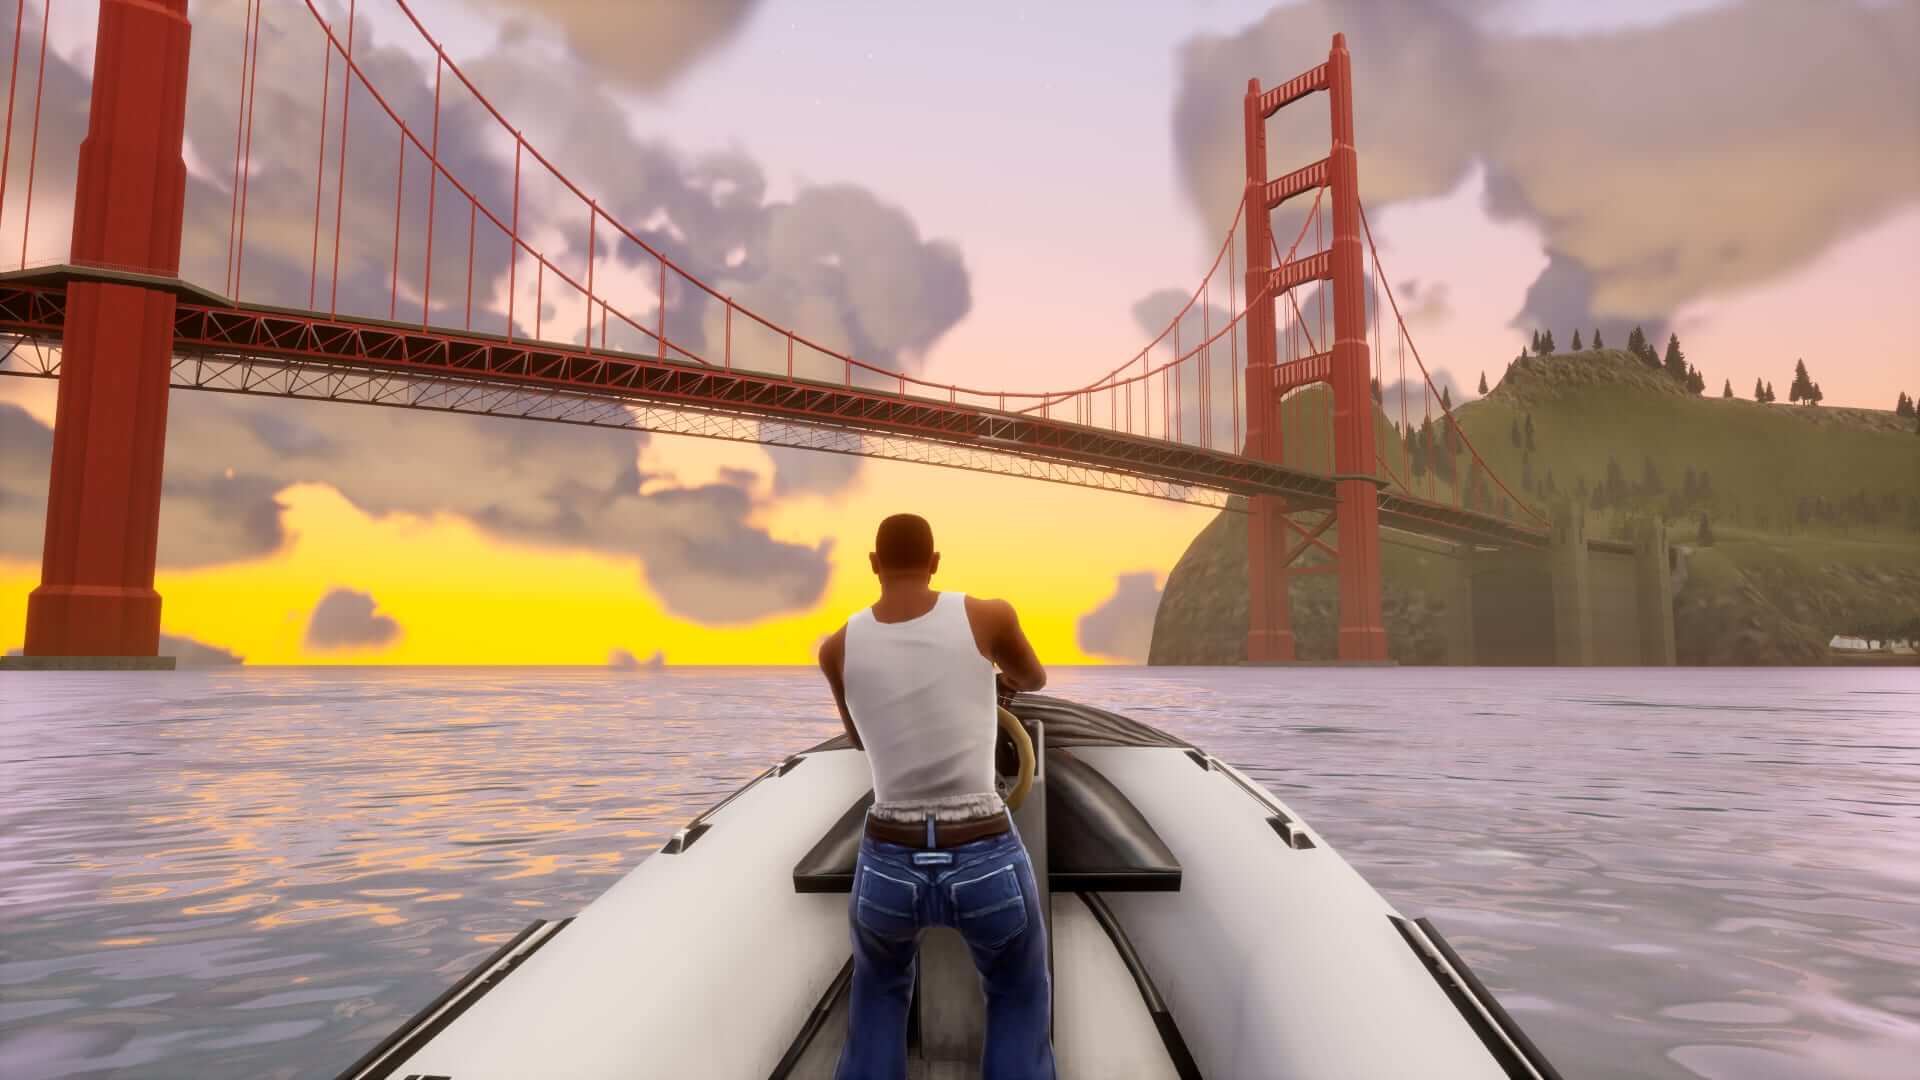 download grand theft auto the trilogy the definitive edition v1.17.37984884-p2p full pc cracked direct links dlgames - download all your games for free